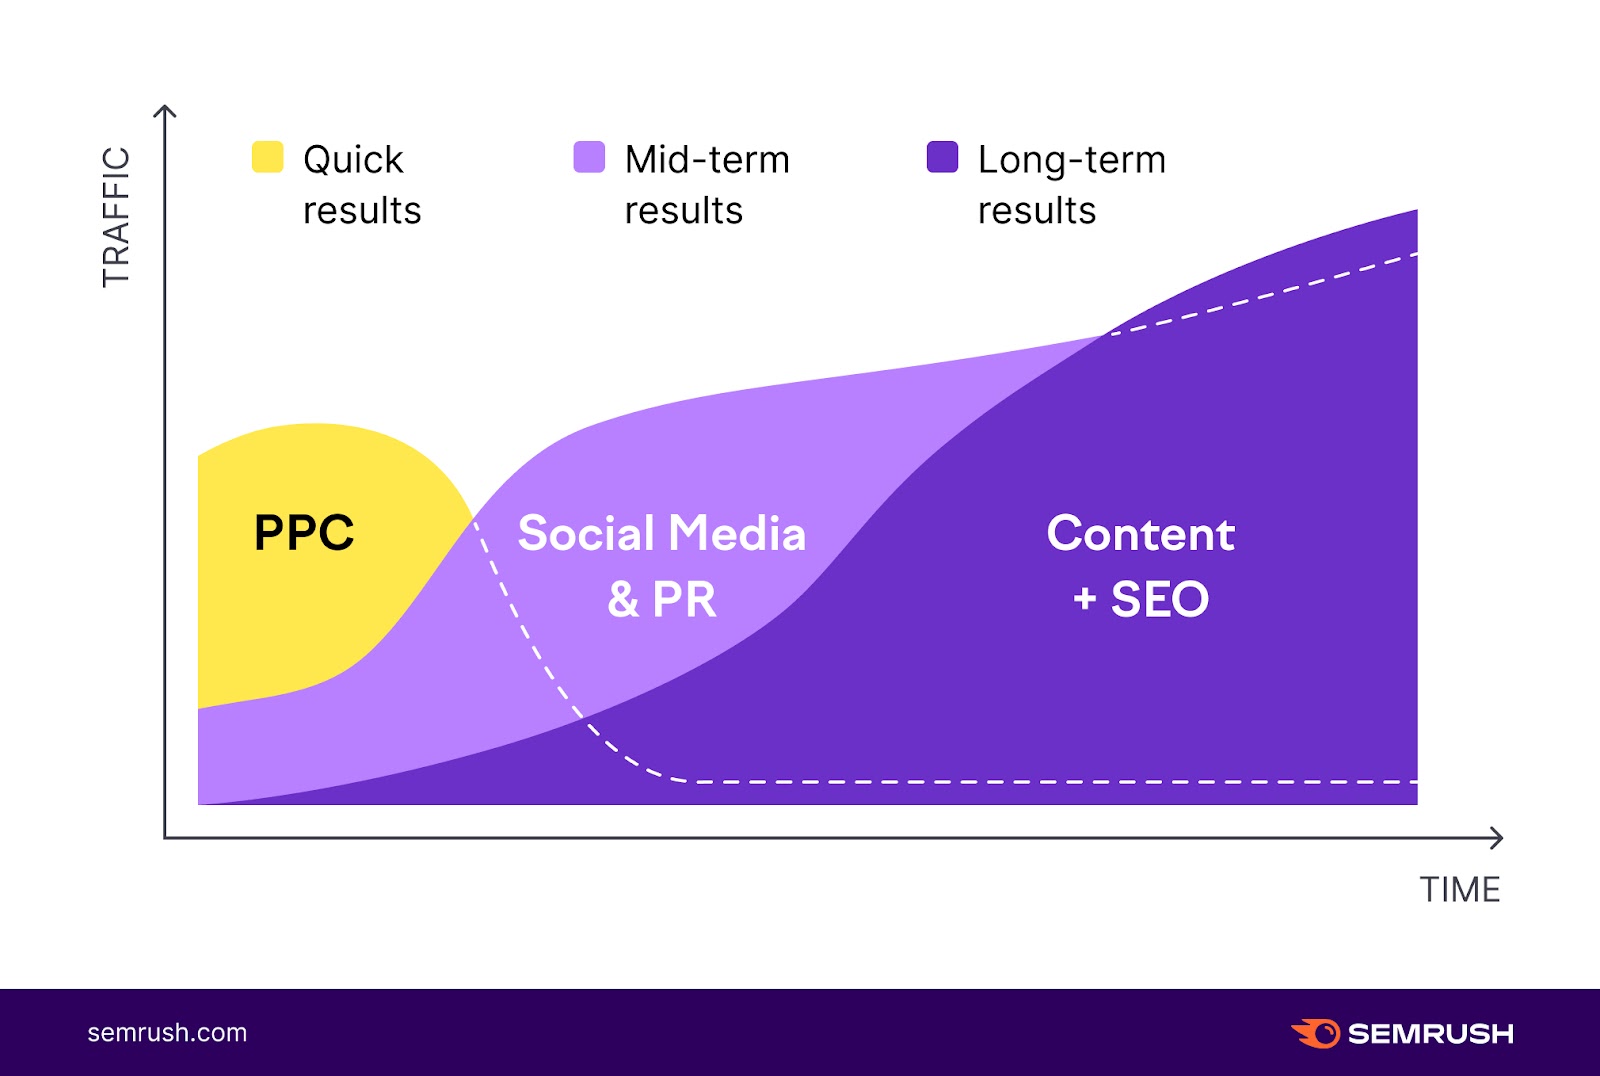 PPC brings quick results, in comparison to content and SEO which bring long-term results